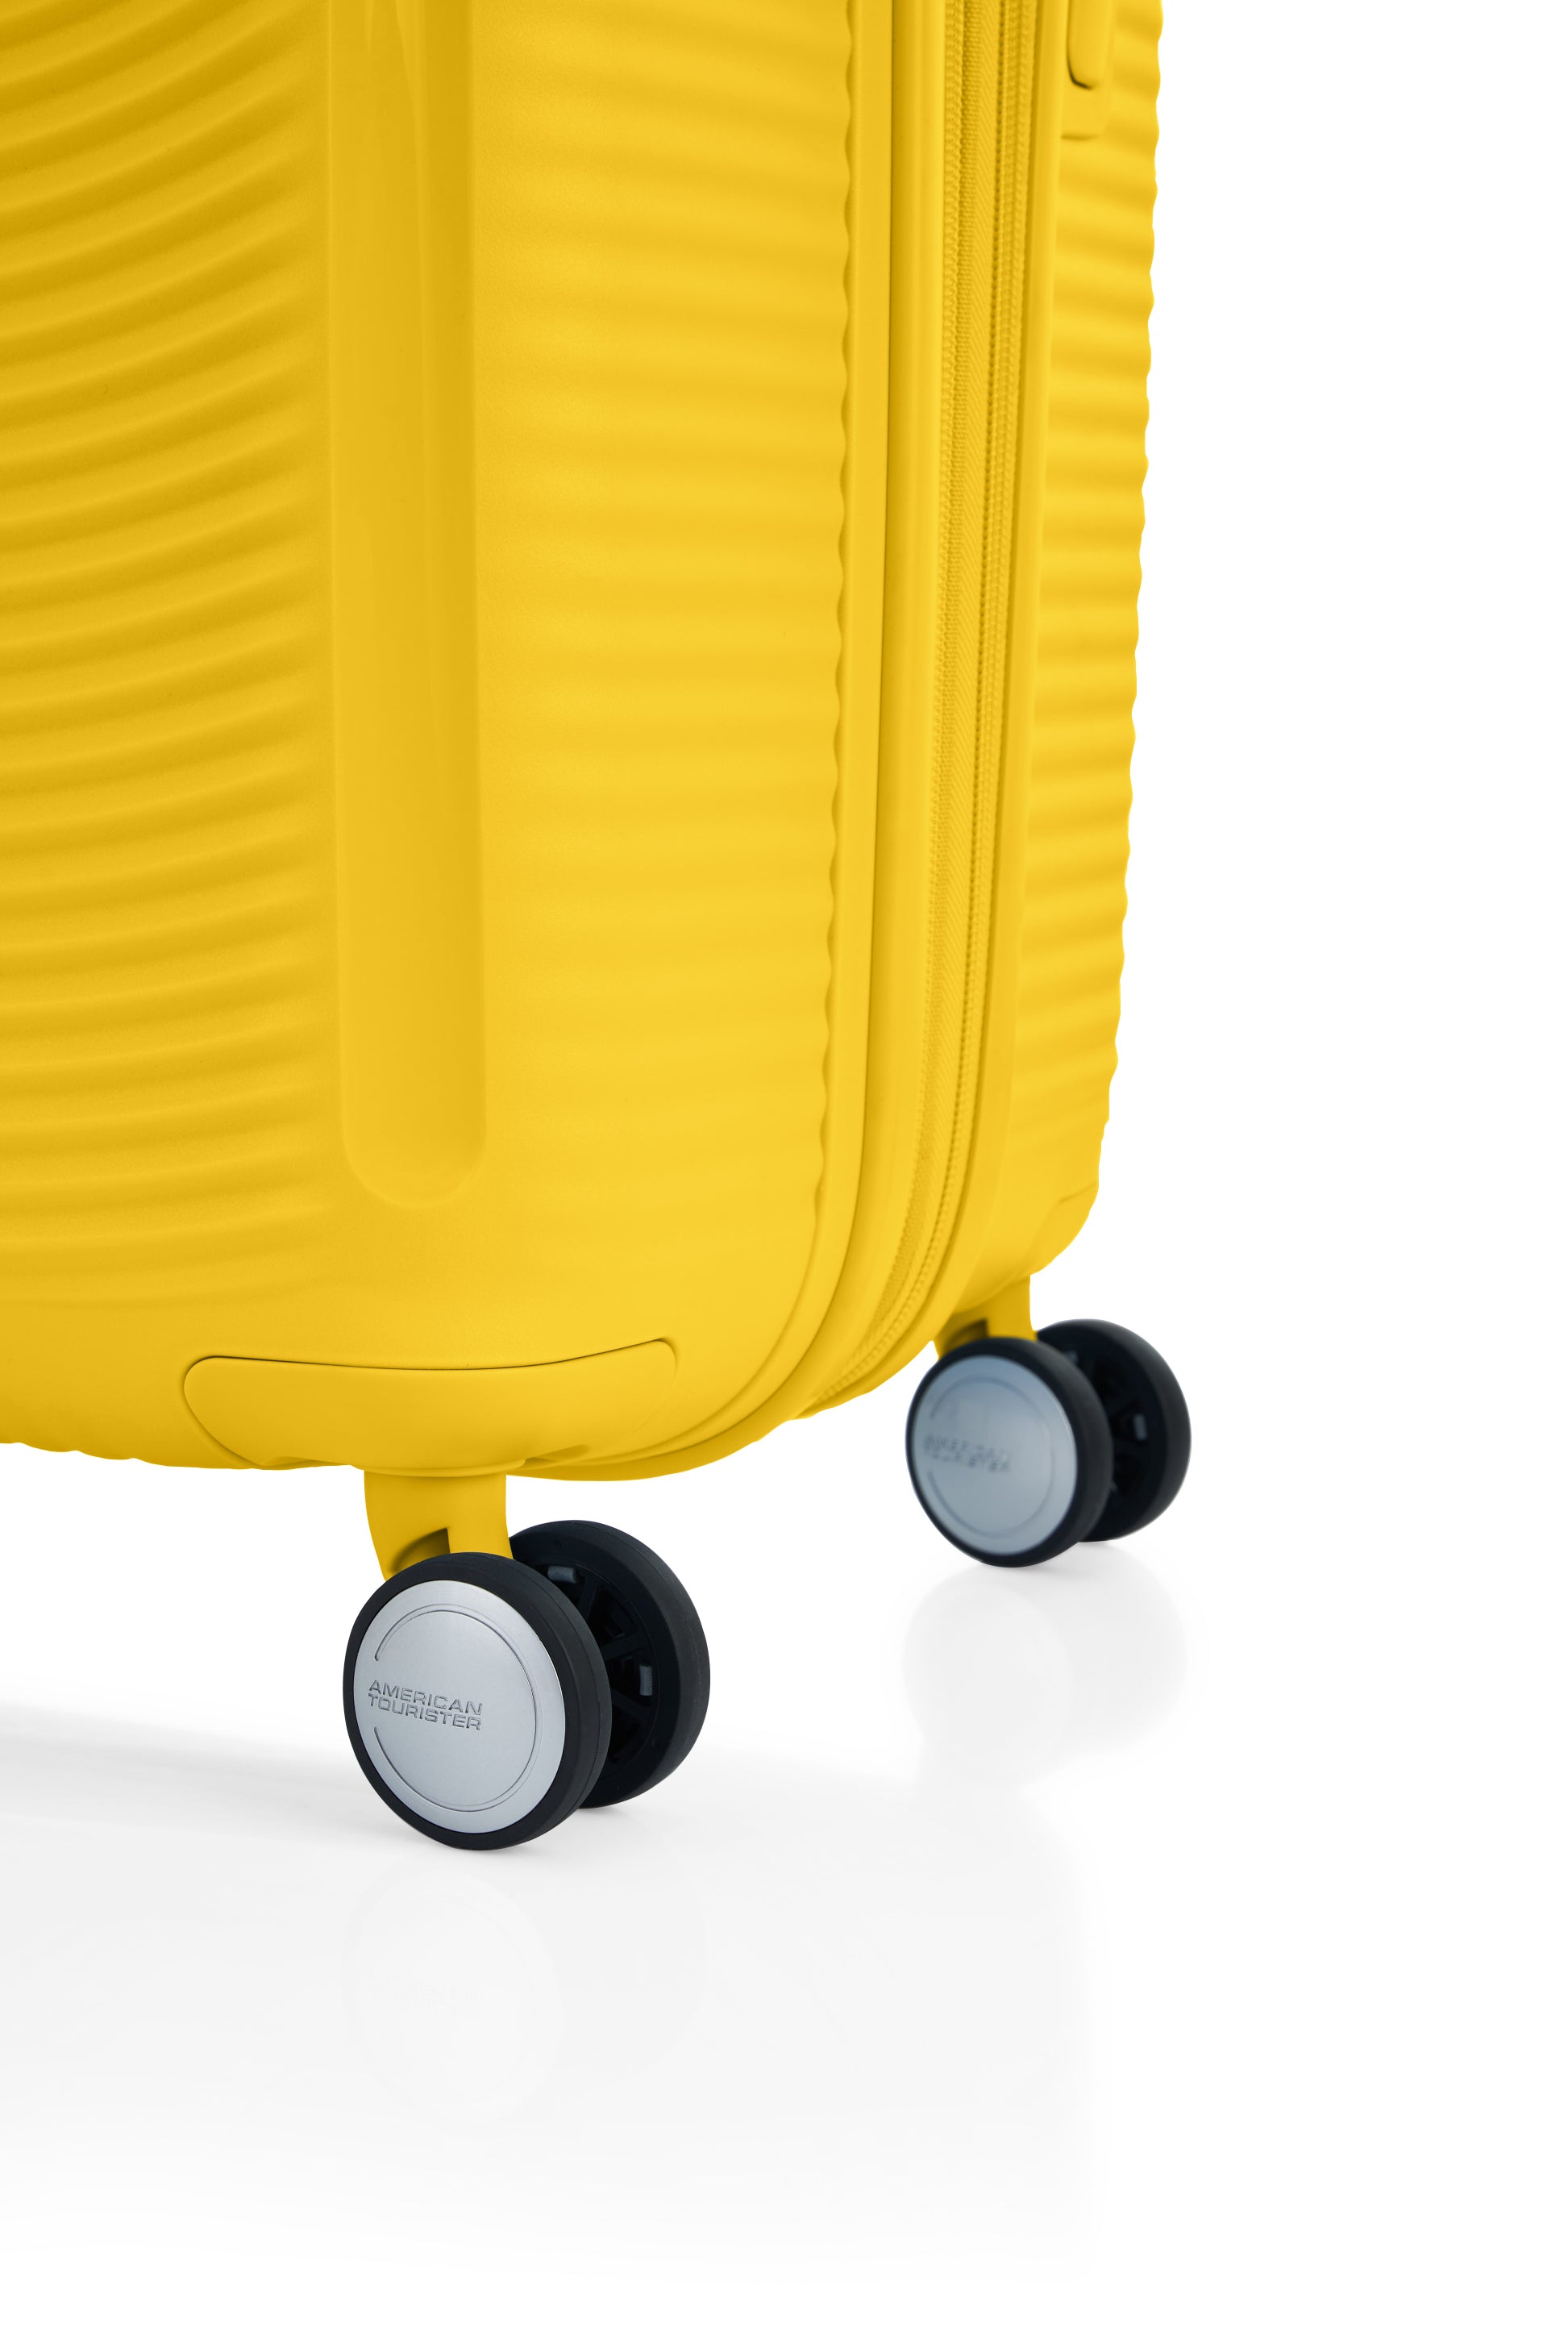 American Tourister - Curio 2.0 80cm Large Suitcase - Golden Yellow-8